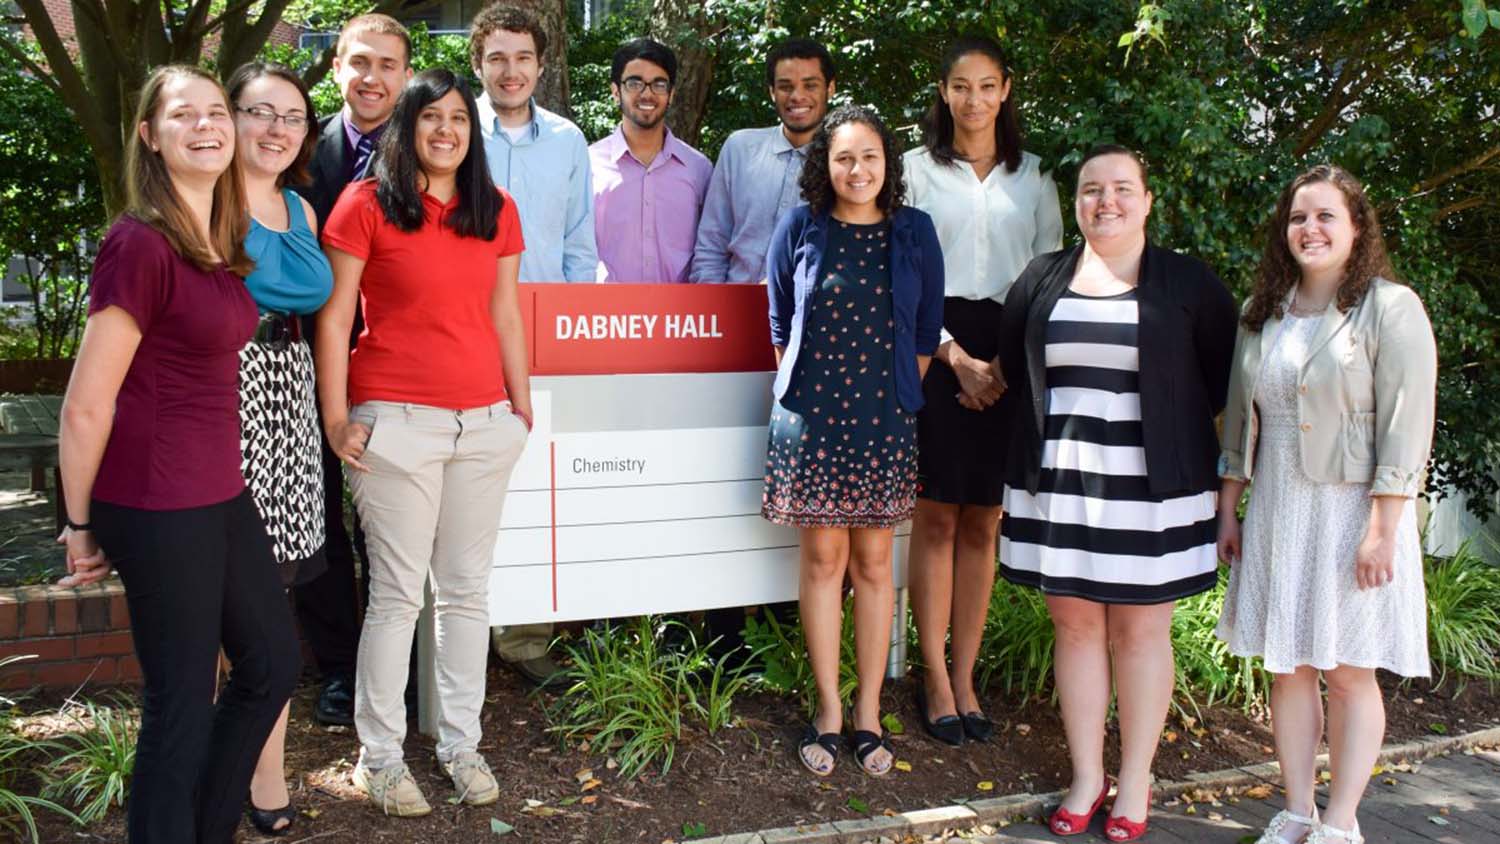 Students pose in front the Dabney Hall sign at NC State.